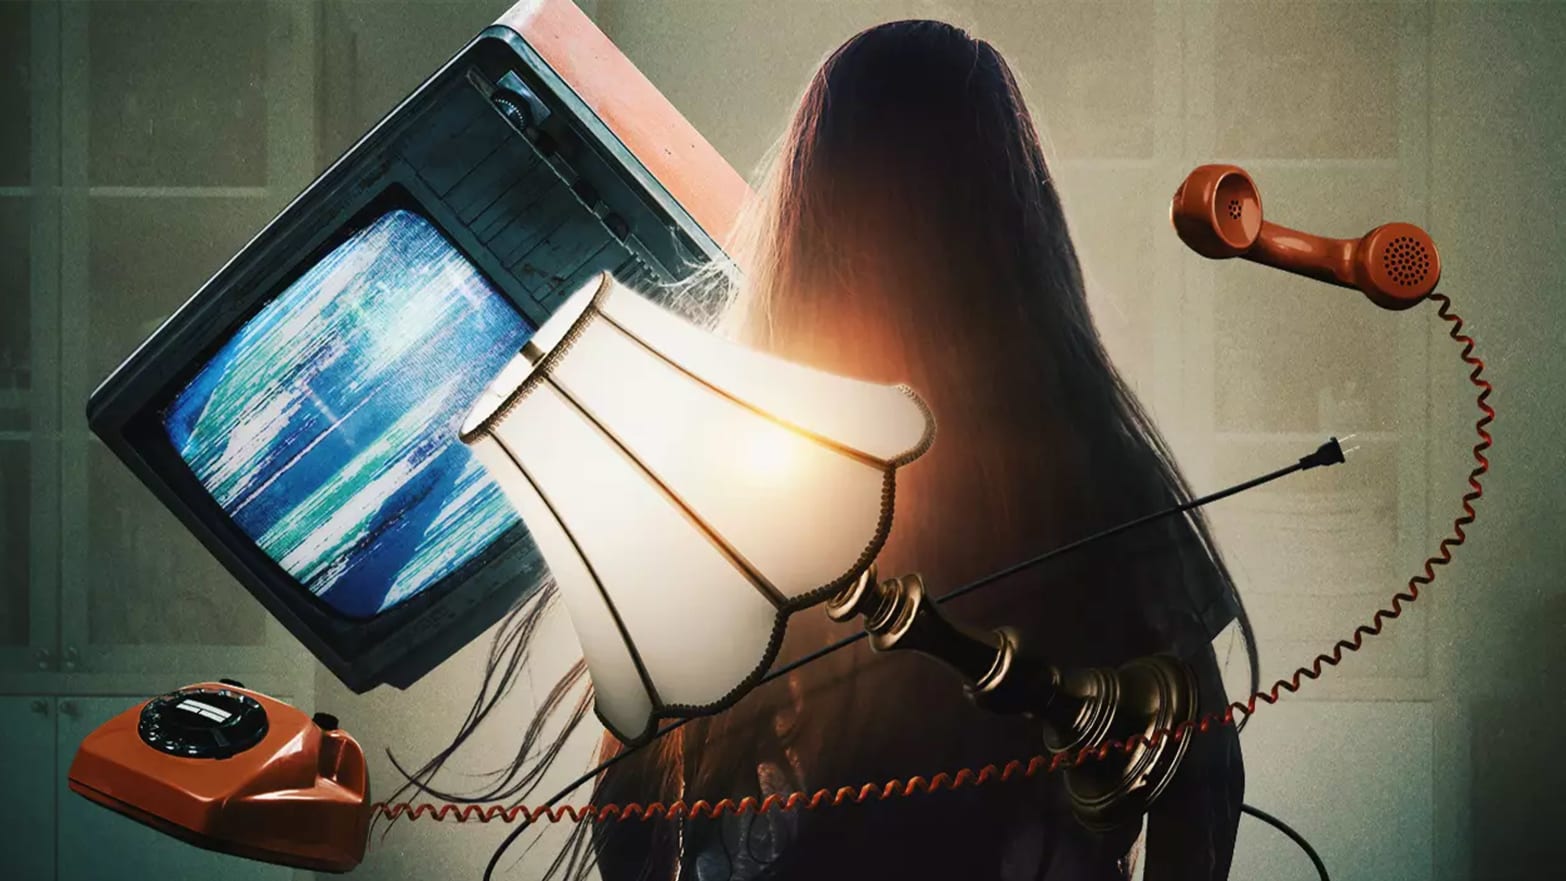 Poster for series Demons and Saviors showing the back of a young girl with a tv, telephone, and lamp swirling around her.